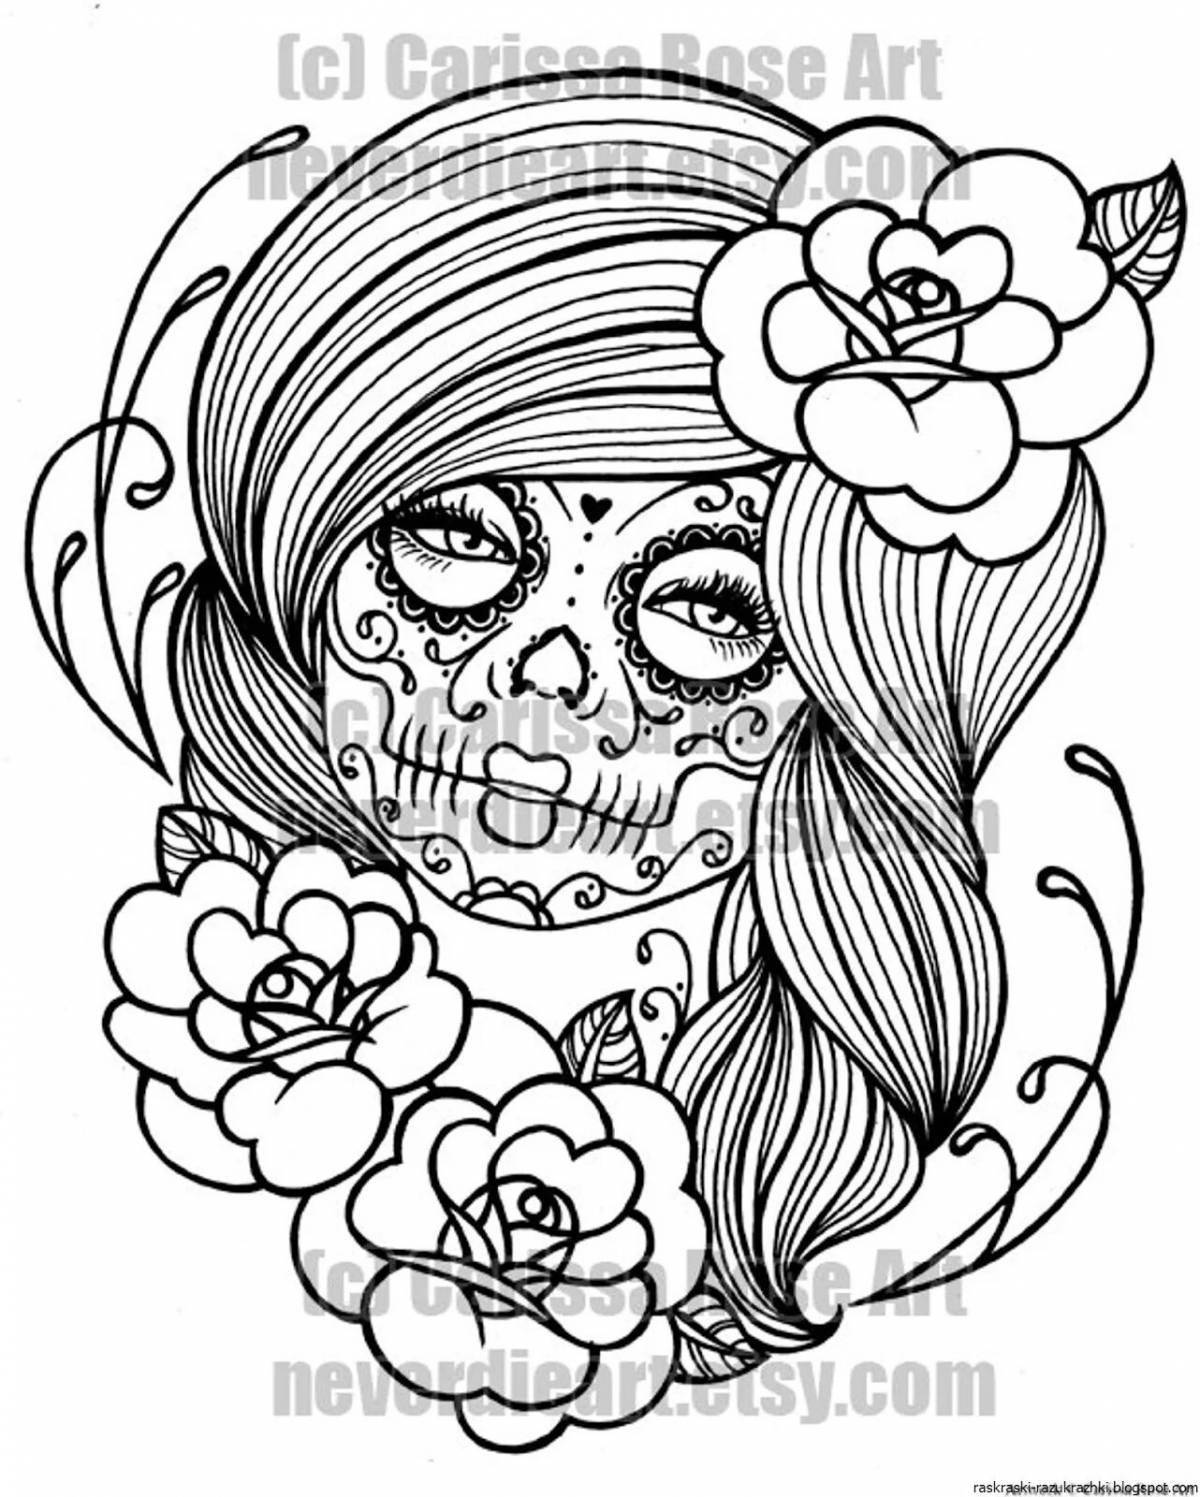 Disgusting coloring pages for girls